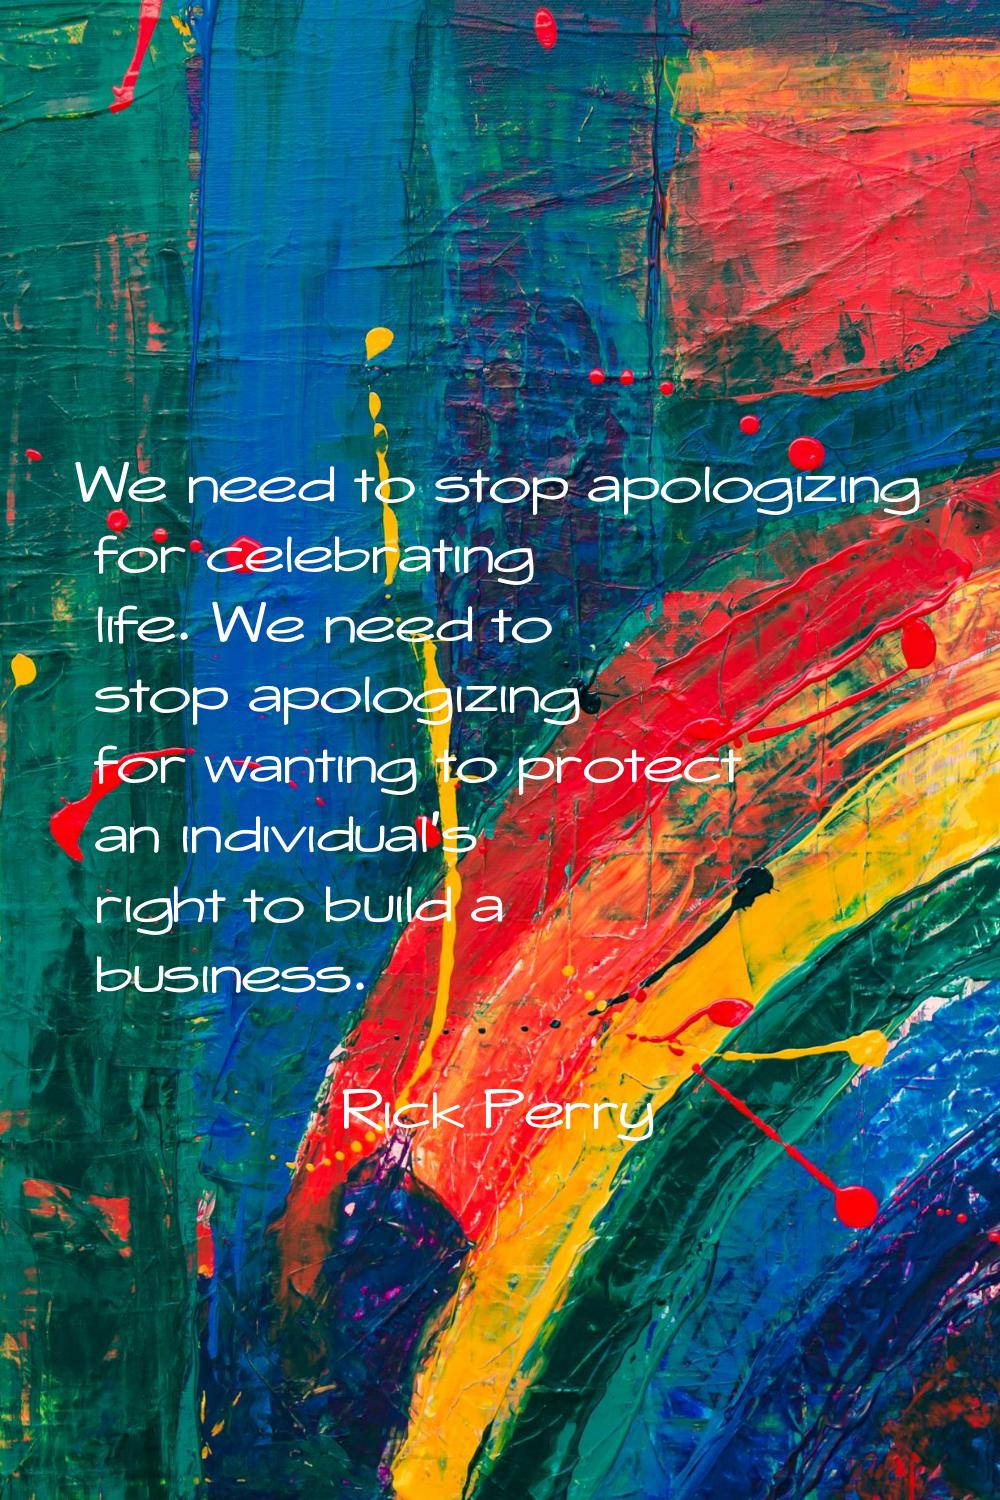 We need to stop apologizing for celebrating life. We need to stop apologizing for wanting to protec